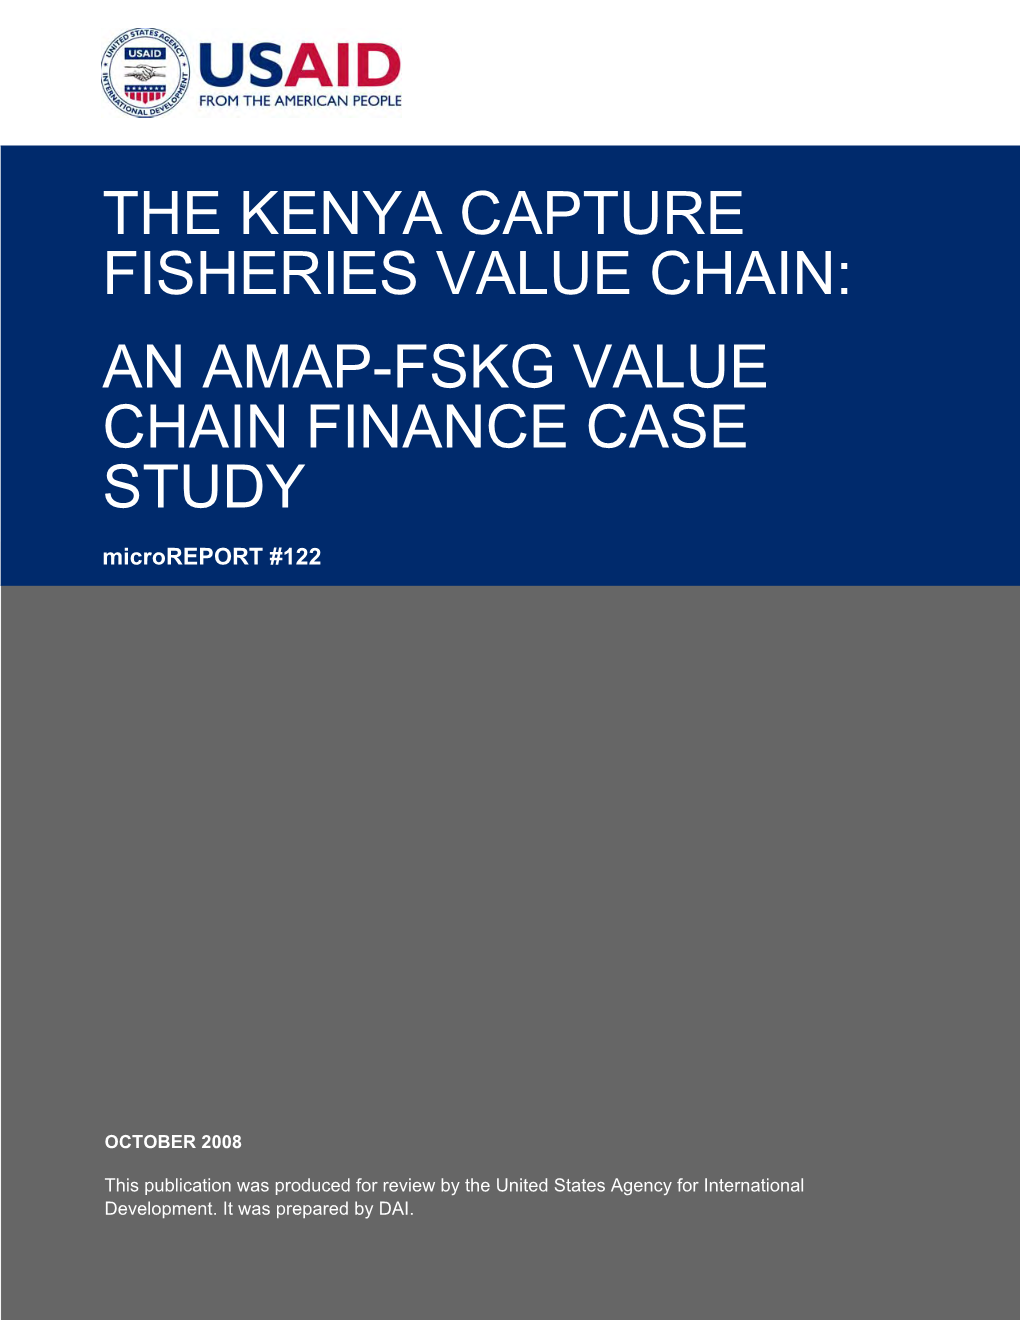 THE KENYA CAPTURE FISHERIES VALUE CHAIN: an AMAP-FSKG VALUE CHAIN FINANCE CASE STUDY Microreport #122